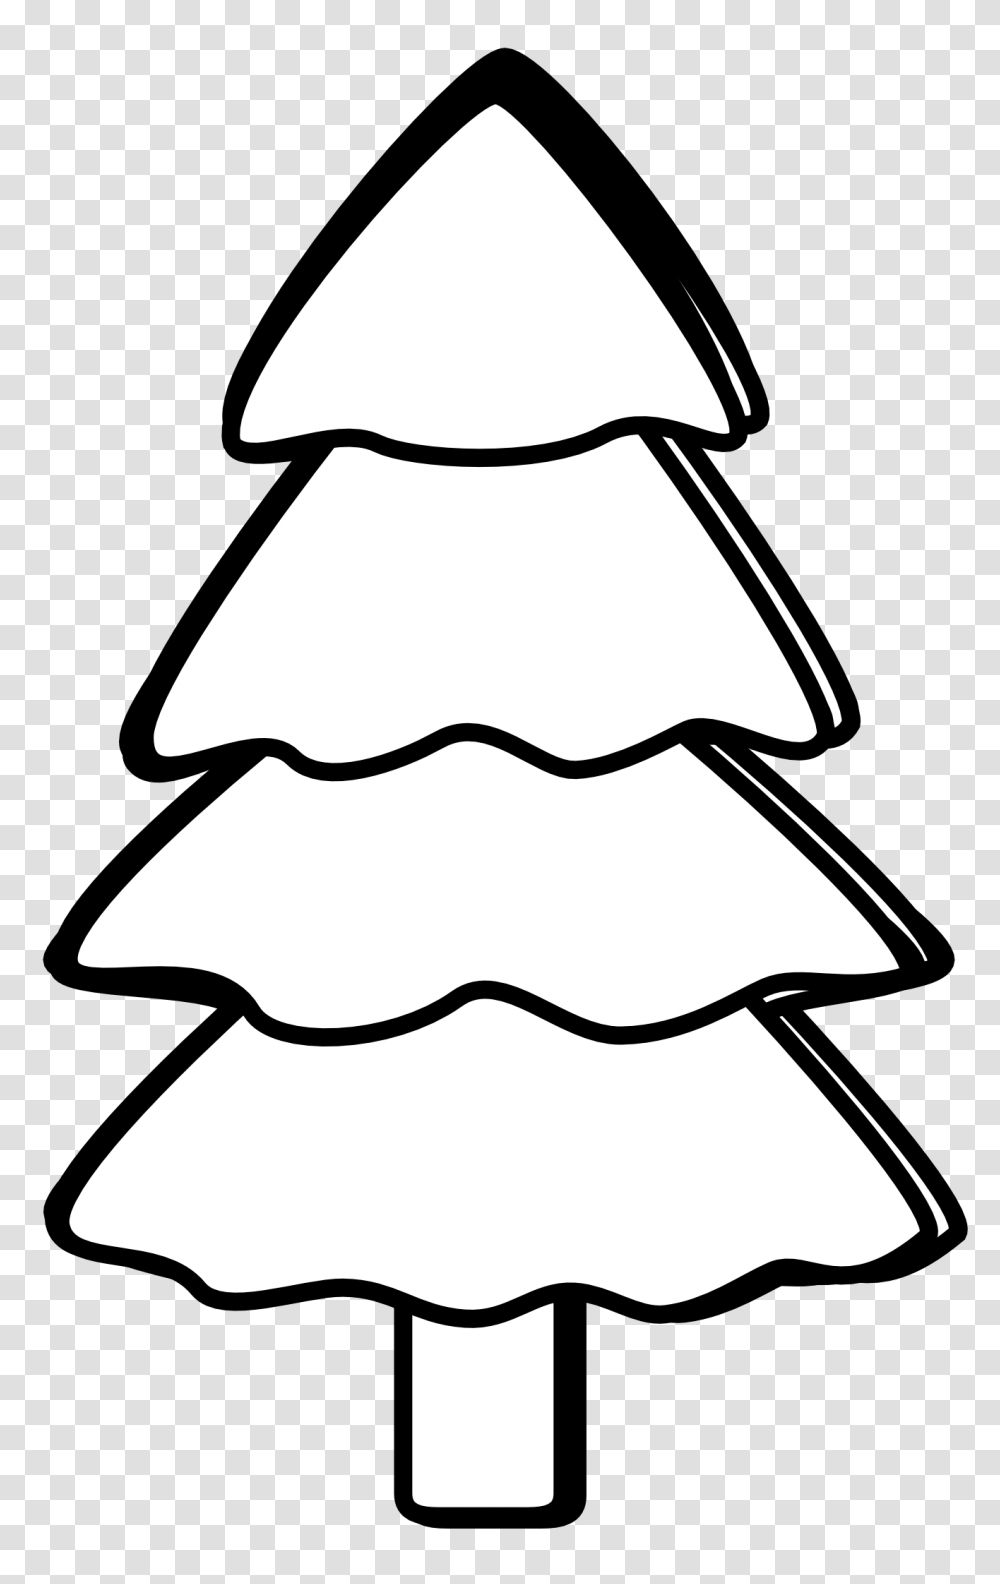 Merry Christmas Images Black And White, Stencil, Invertebrate, Animal, Label Transparent Png